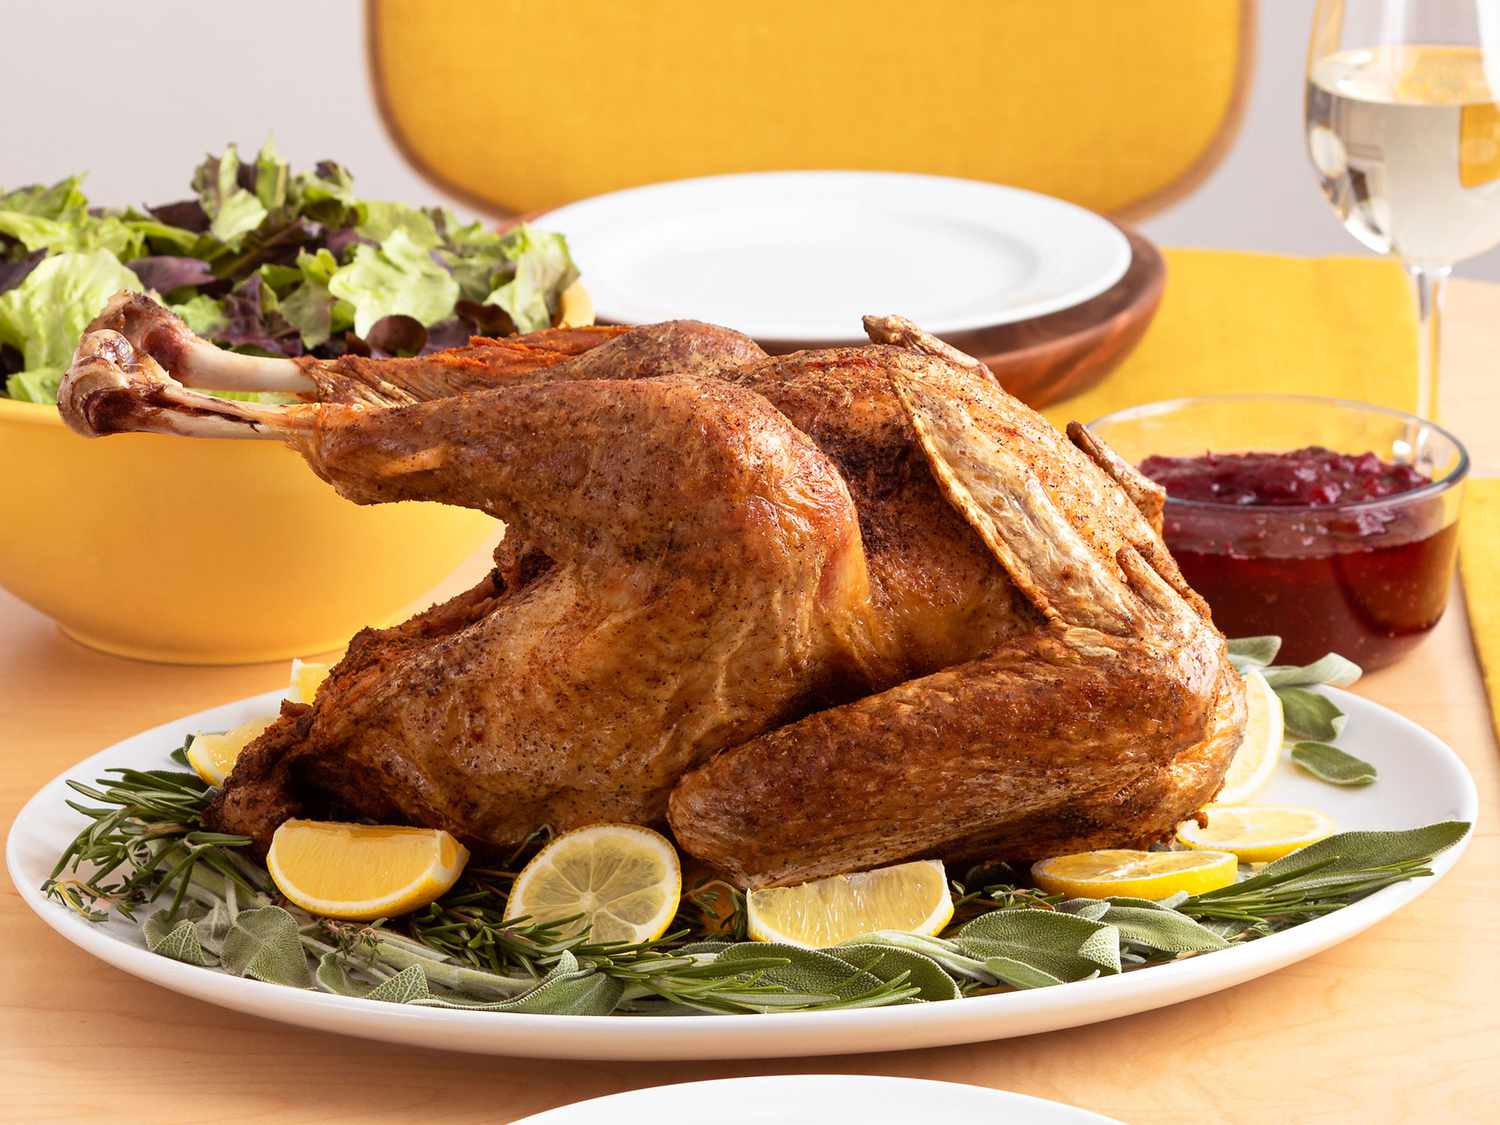 A straight on view of a golden brown turkey on a white oval platter dressed with fresh herbs and sliced lemons